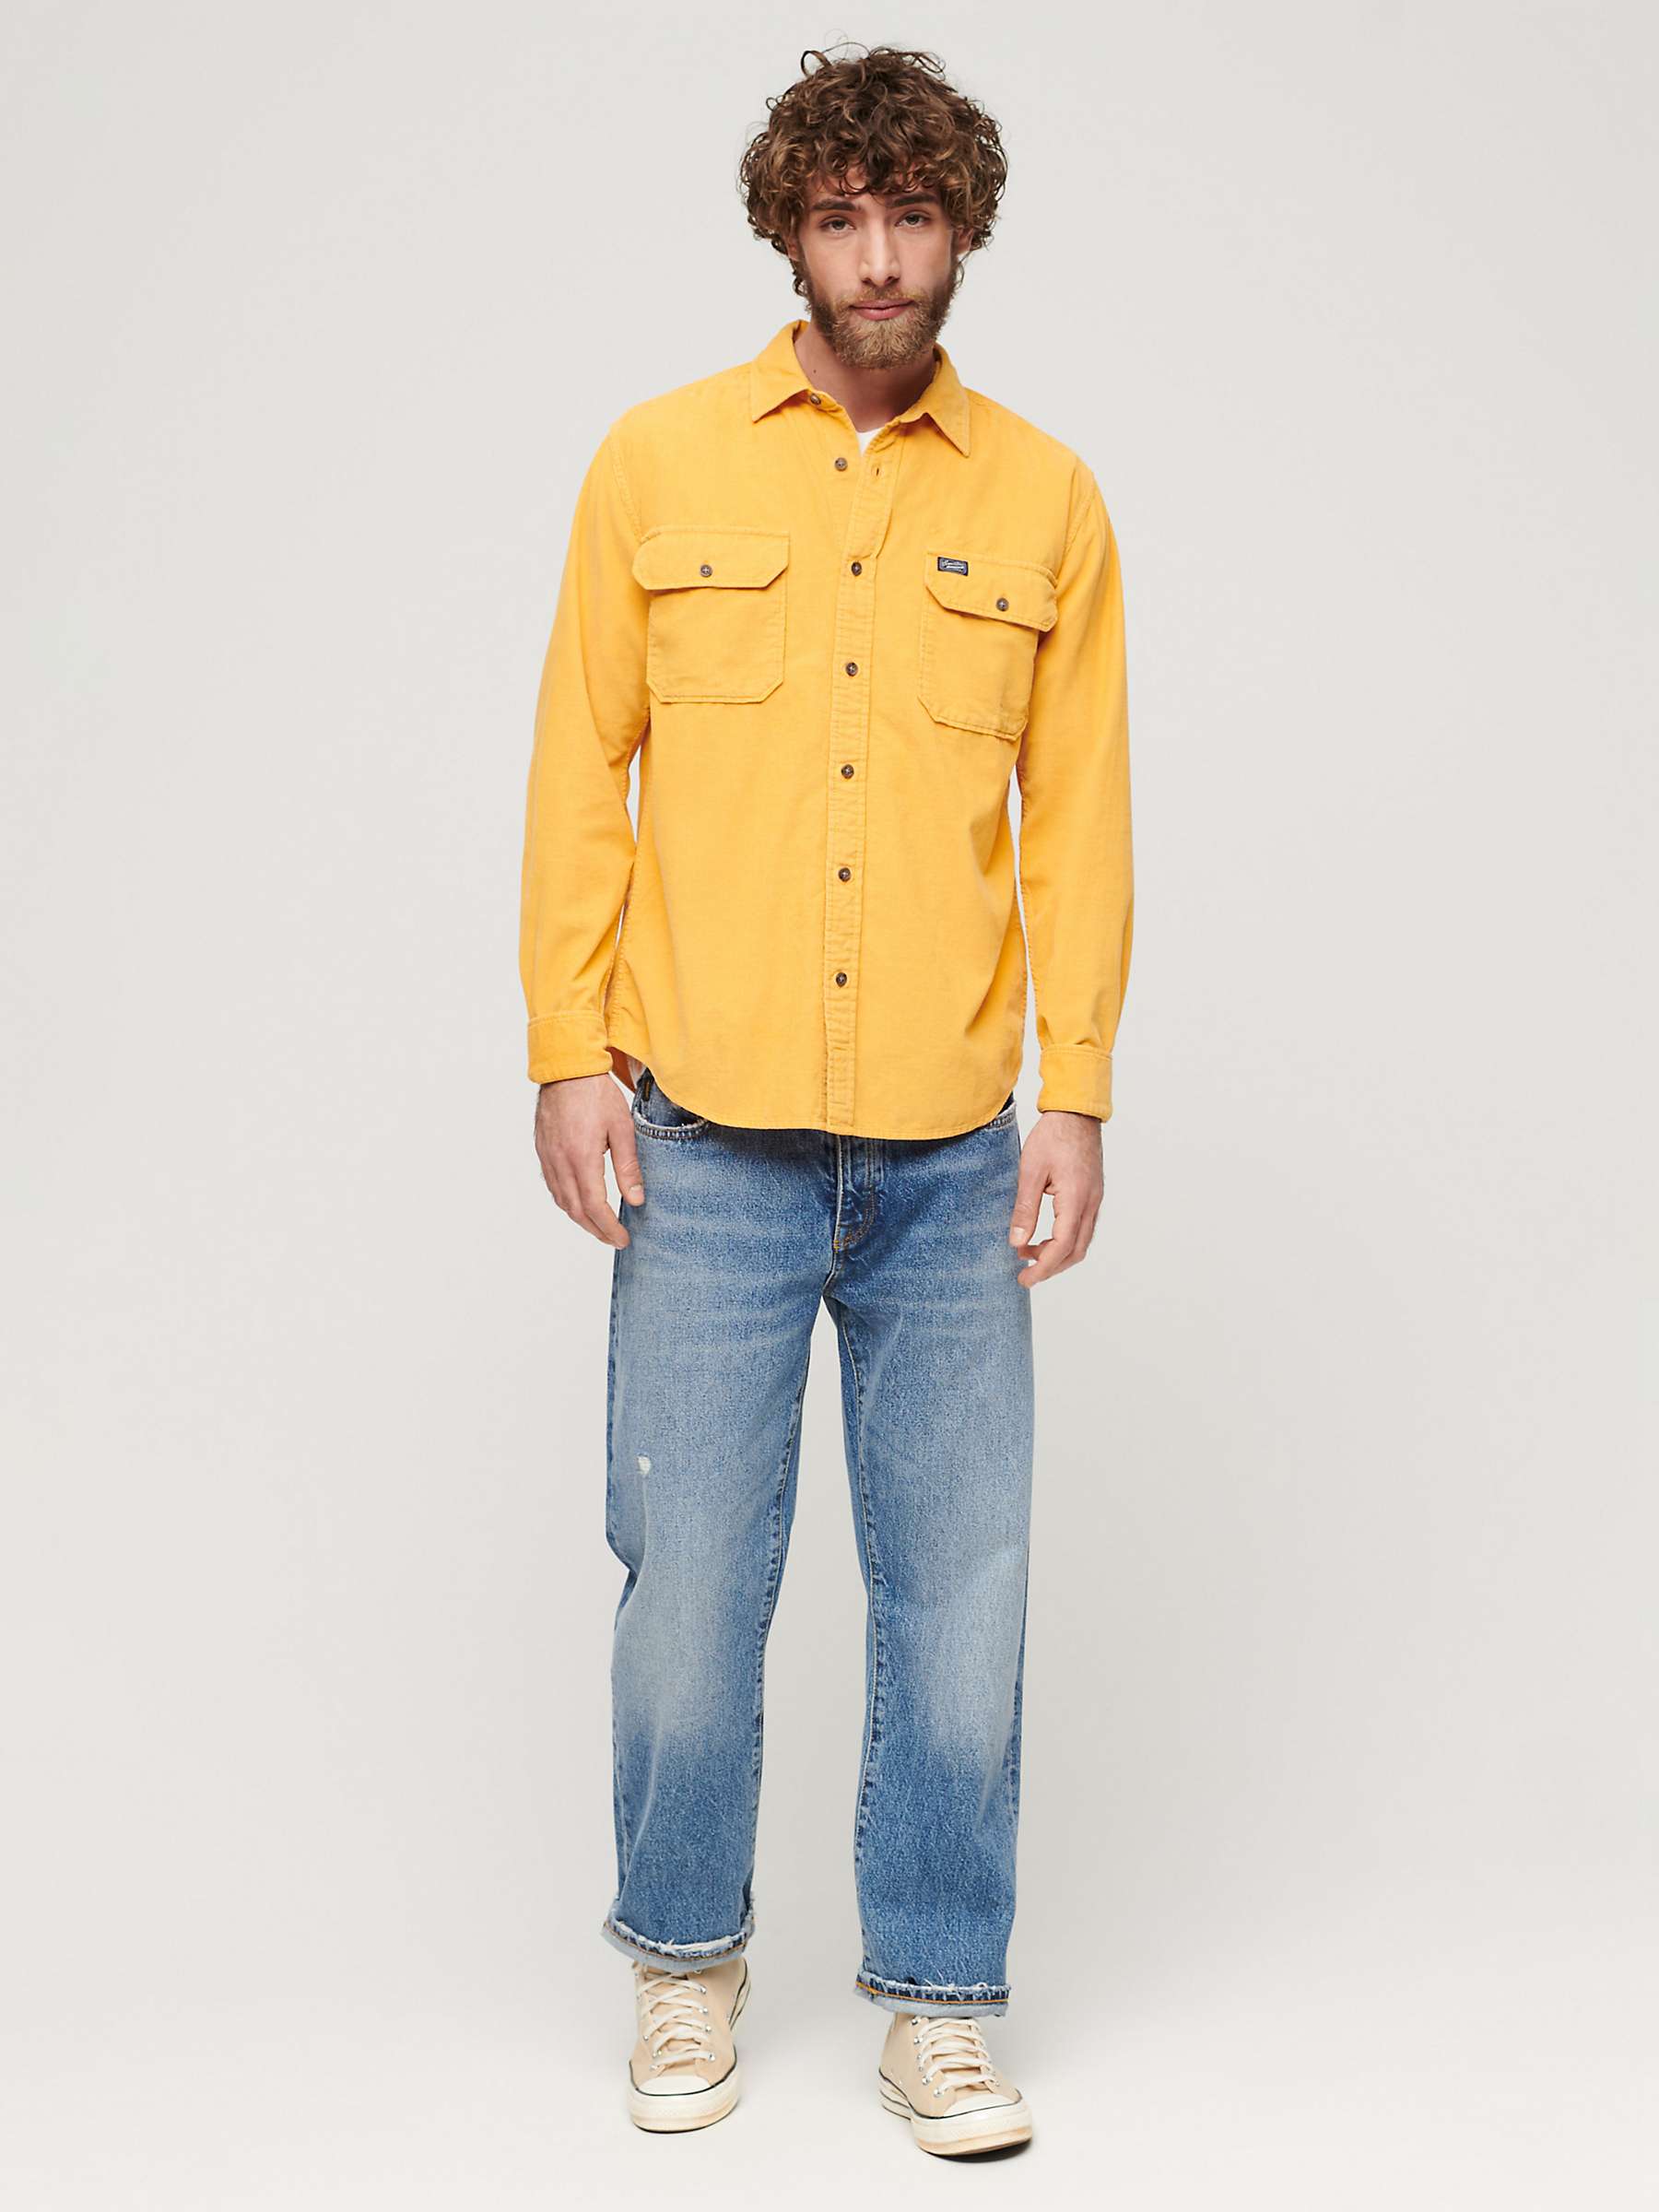 Buy Superdry Micro Cord Long Sleeve Shirt, Golden Yellow Online at johnlewis.com